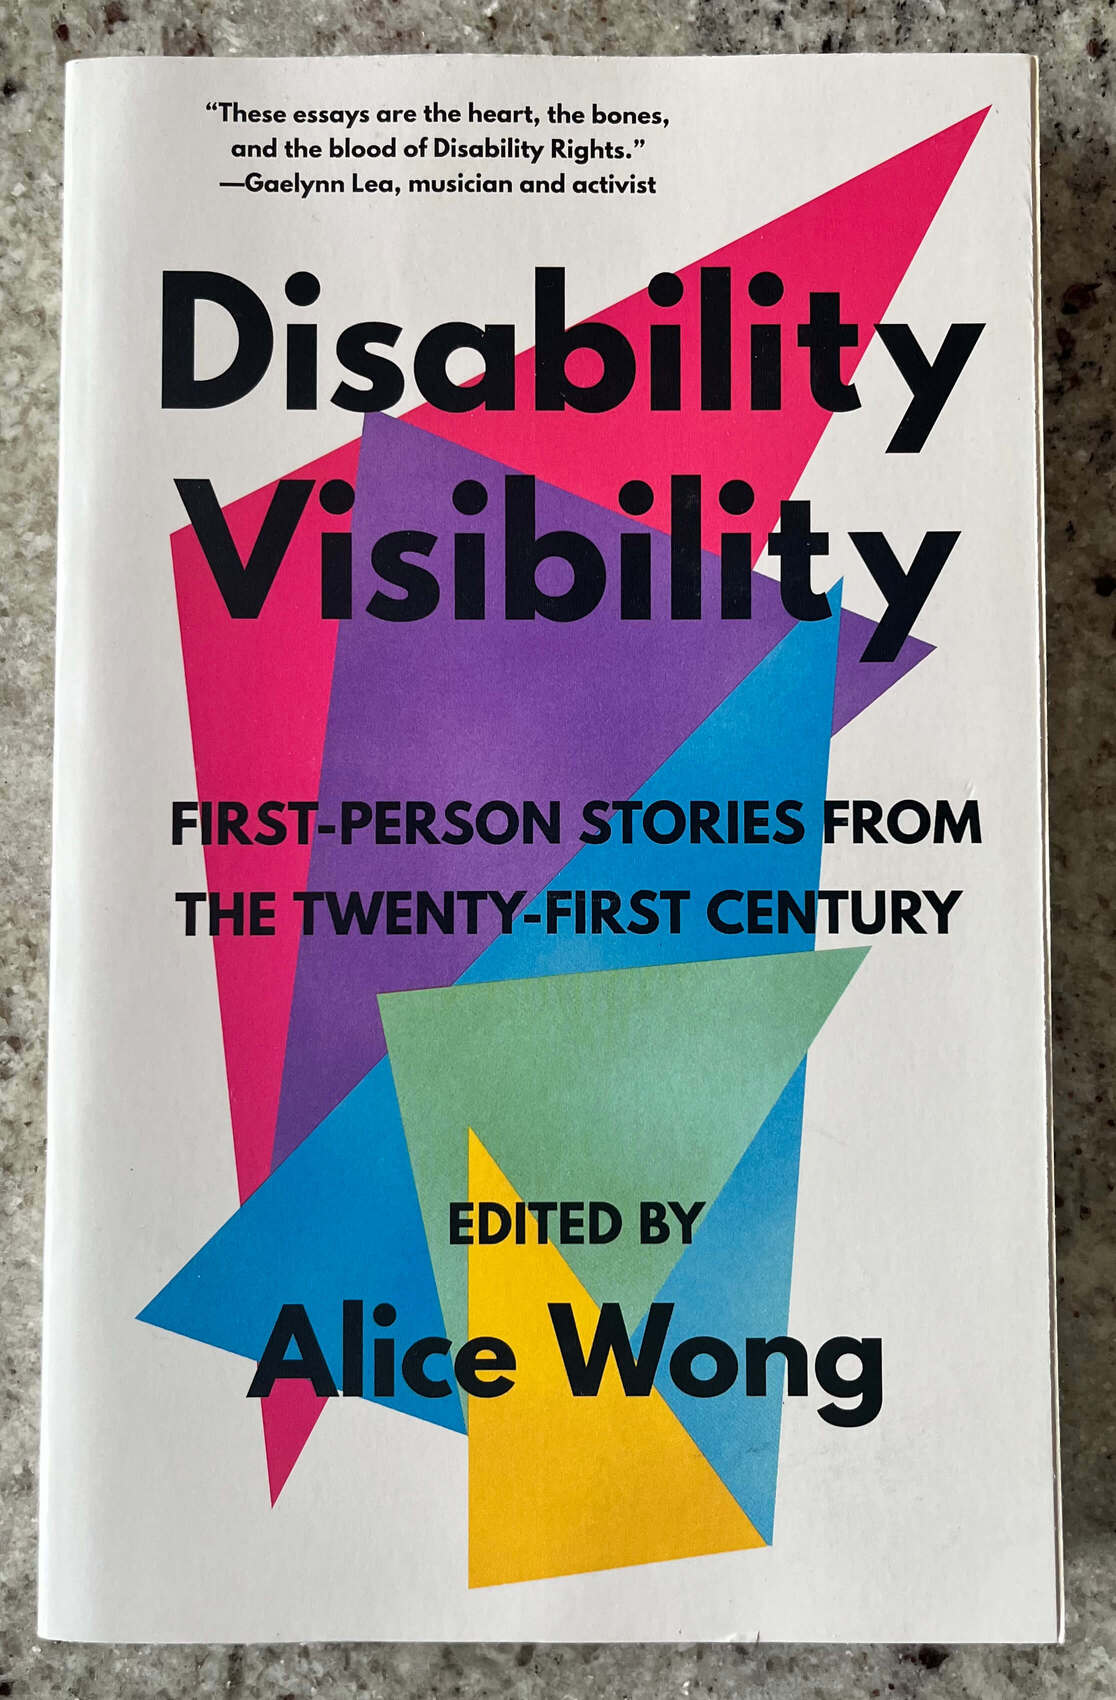 “Disability Visibility: First-person Stories from the Twenty-First Century” Edited by Alice Wong.